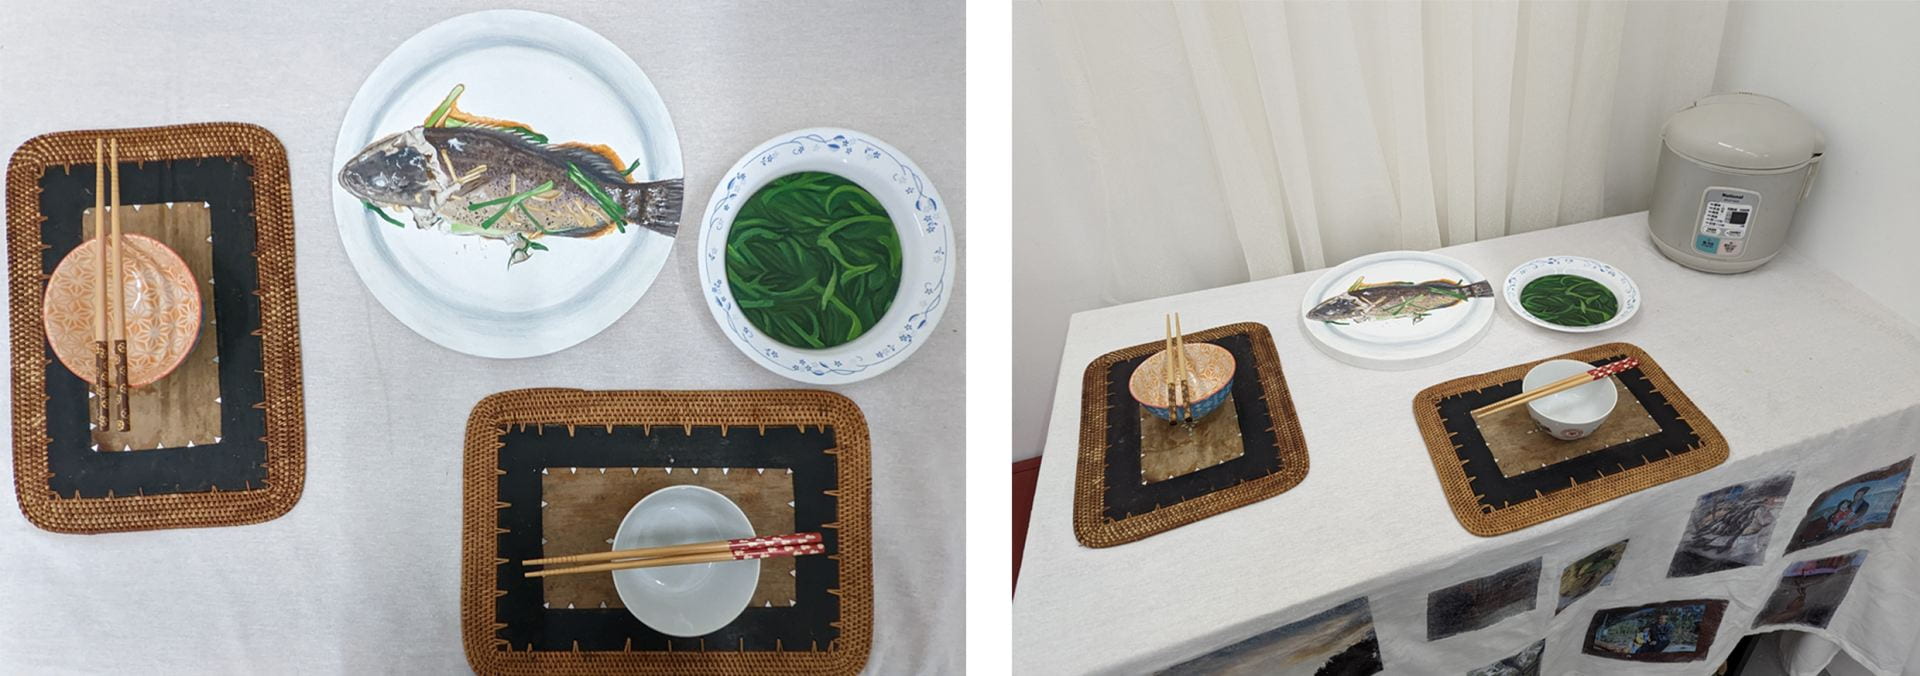 A table is set with placemats, bowls and chopsticks. To plates sit in the middle with photorealistic painted food on them including a plate with a baked fish and a bowl with steamed greens. 